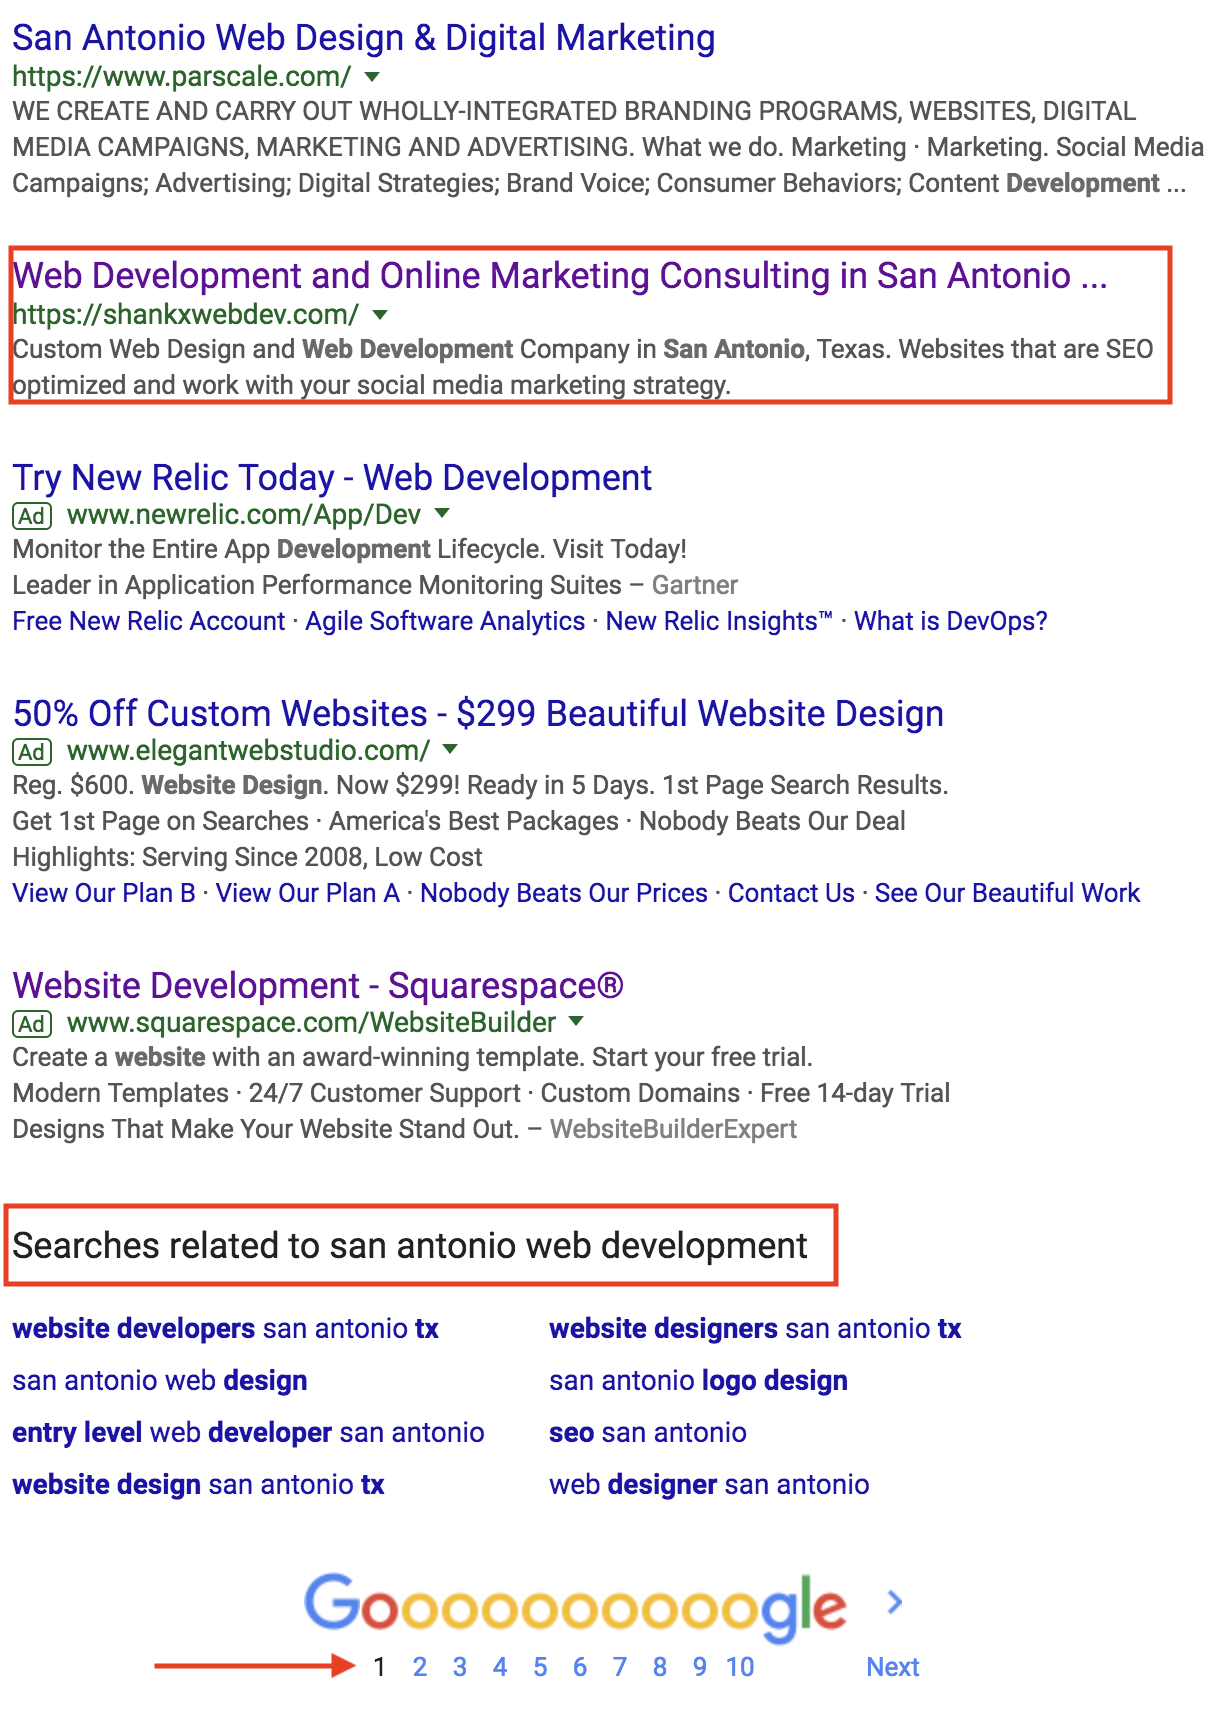 google webpage showing seo results